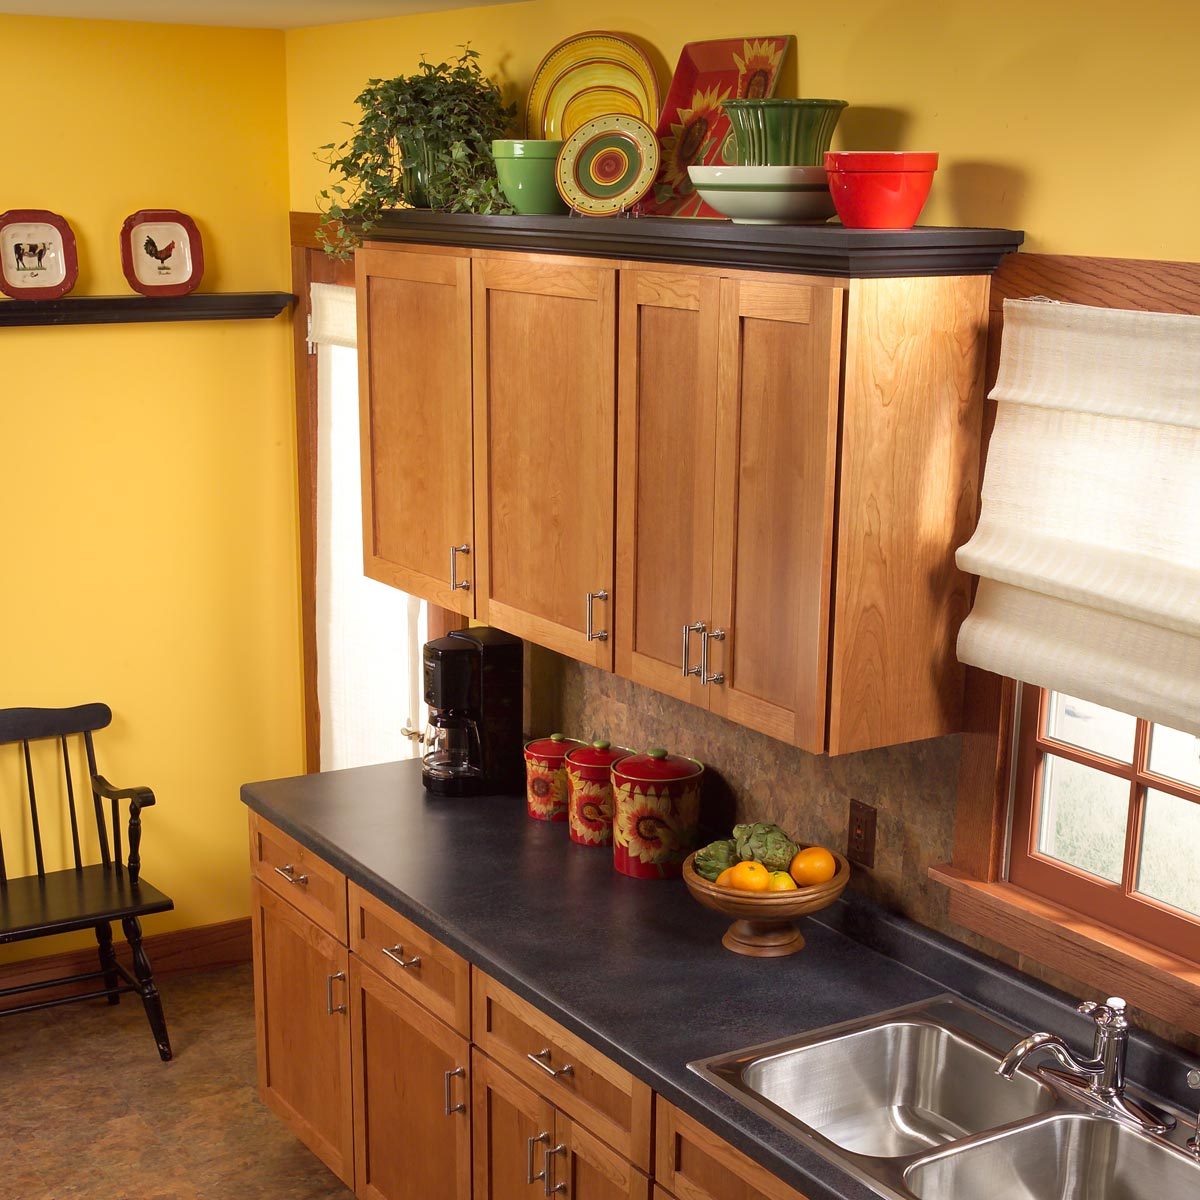 How to Add Shelves Above Kitchen Cabinets | Family Handyman